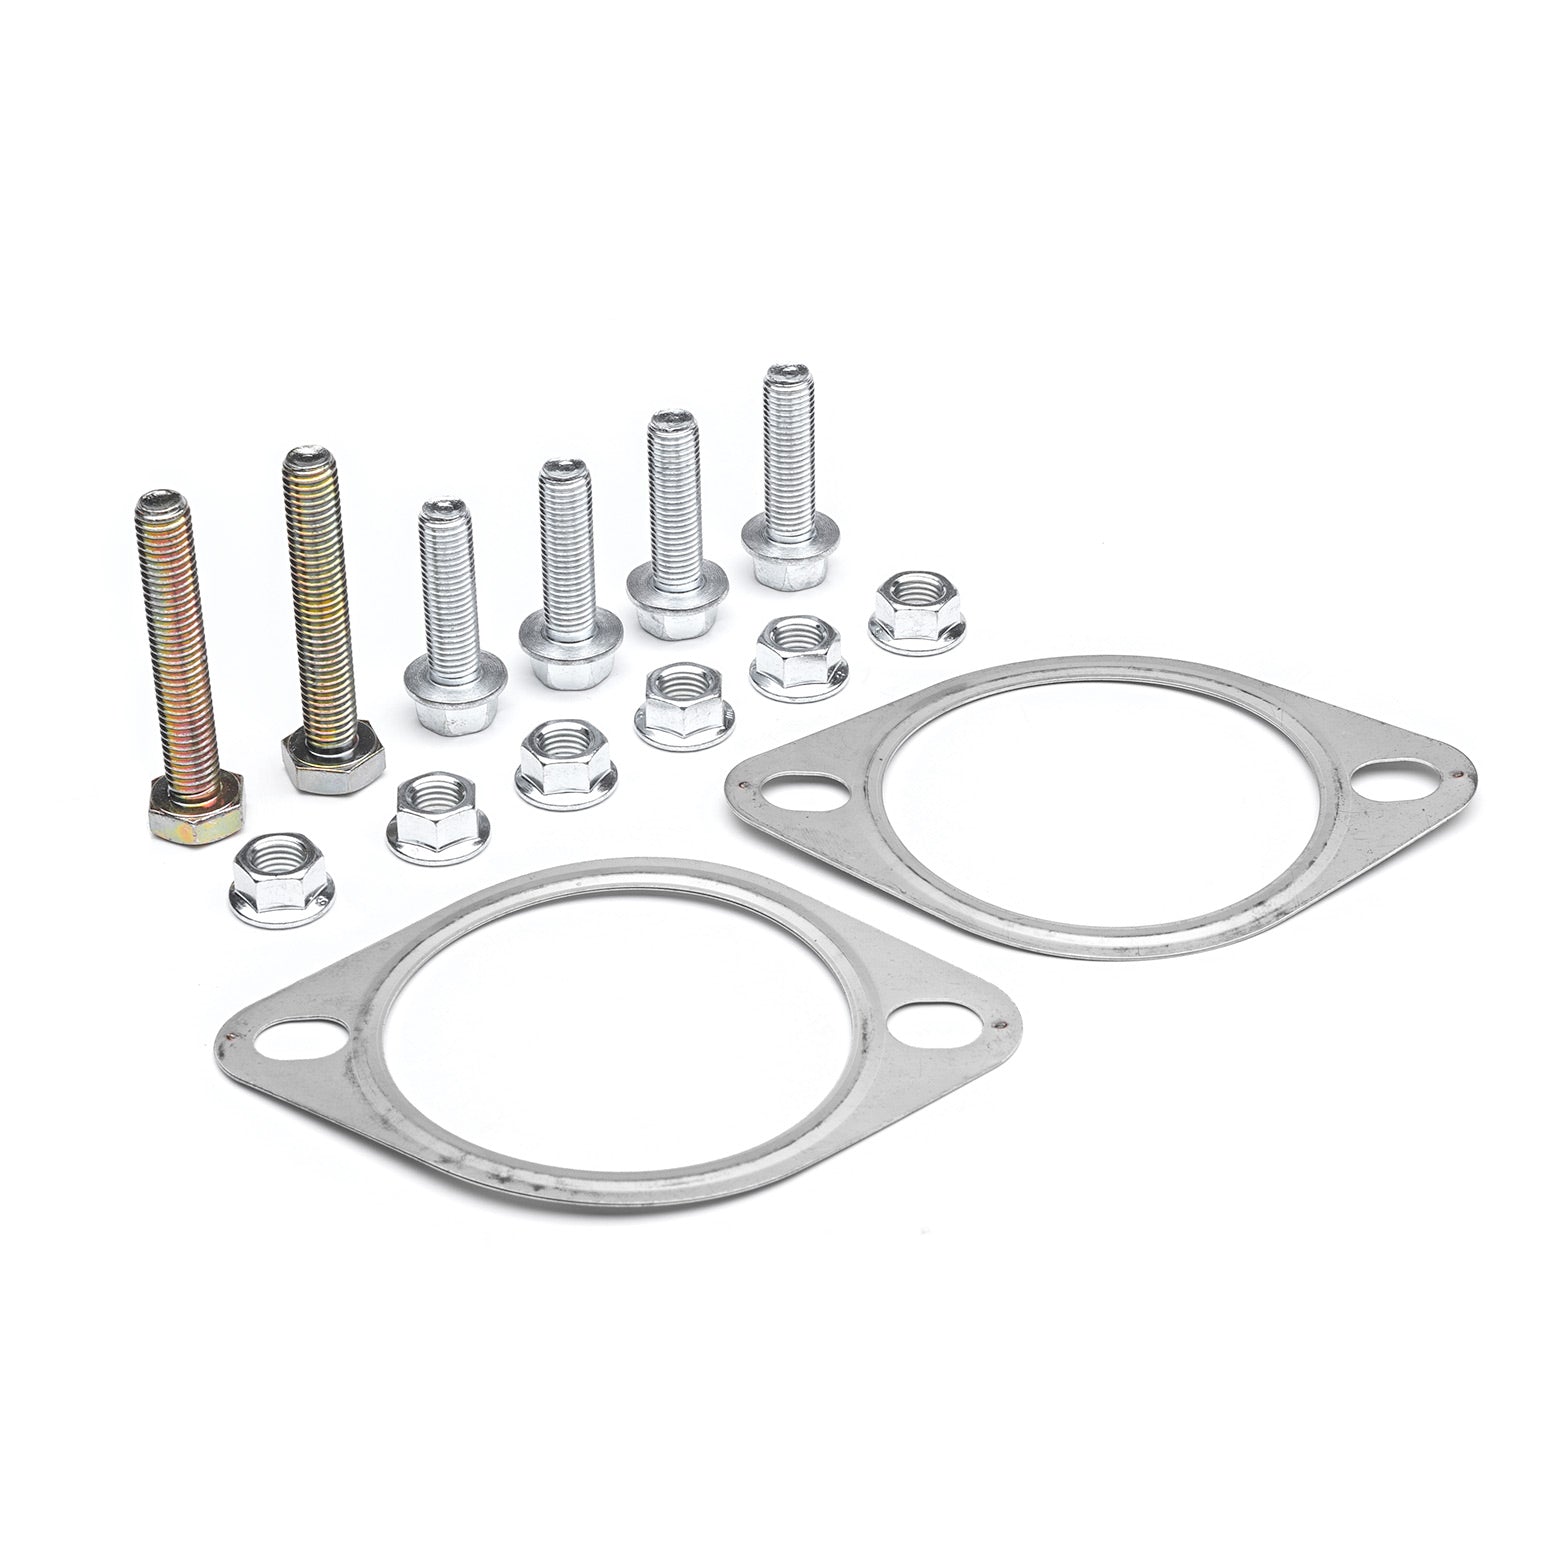 Ford F-150 SS 3.0" Cat-Back Exhaust Hardware Kit